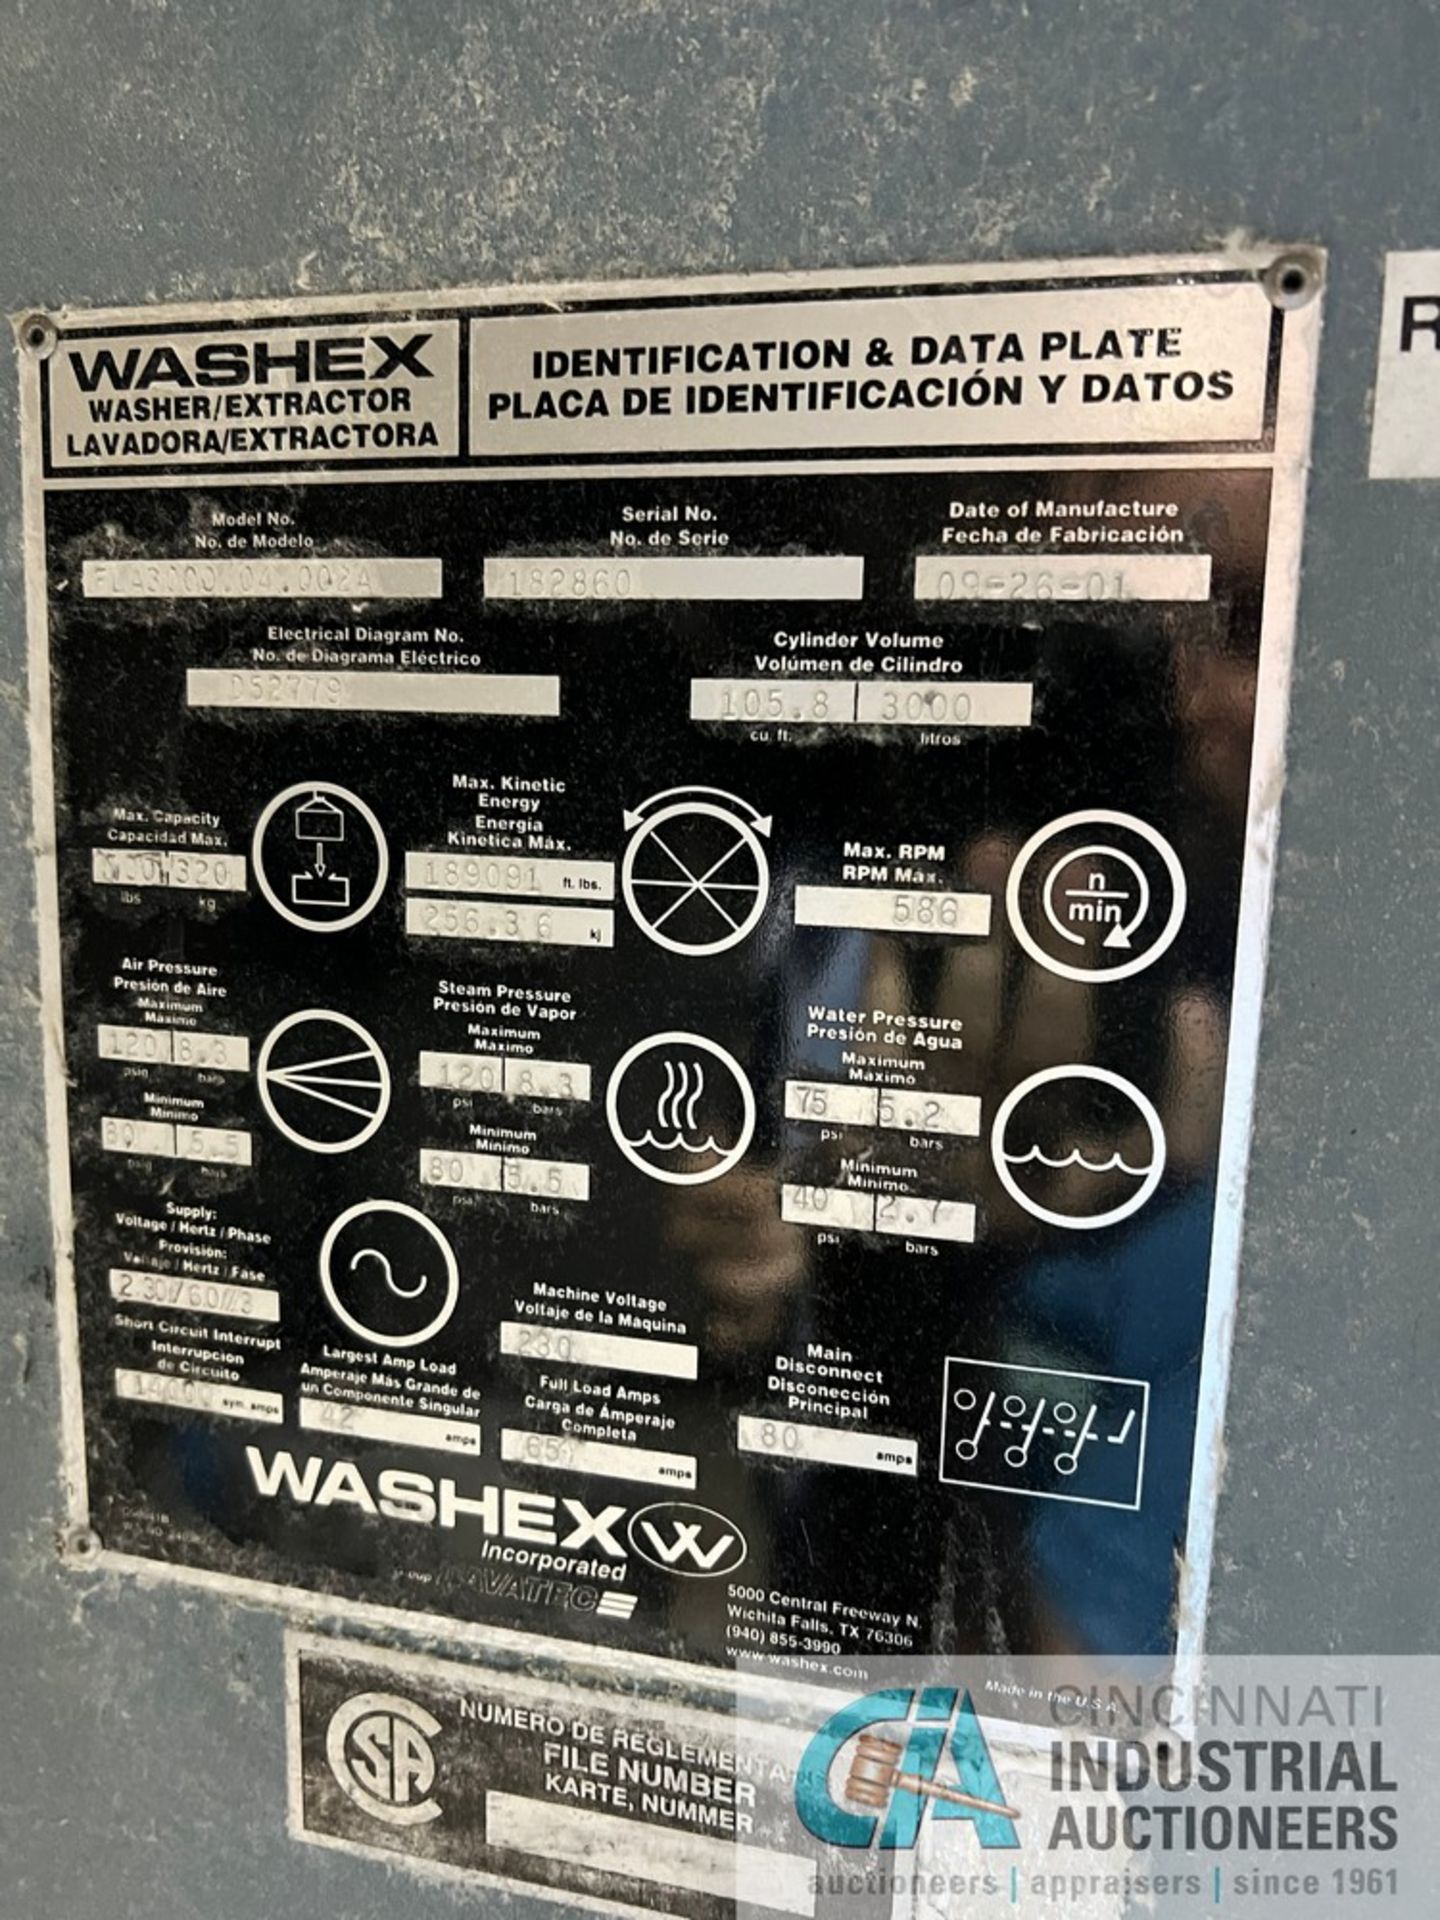 700 LB. WASHEX / LAVATEC MODEL FLA3000.04.002A WASHER EXTRACTOR; S/N 182860, ELITE II PLC - Image 3 of 3